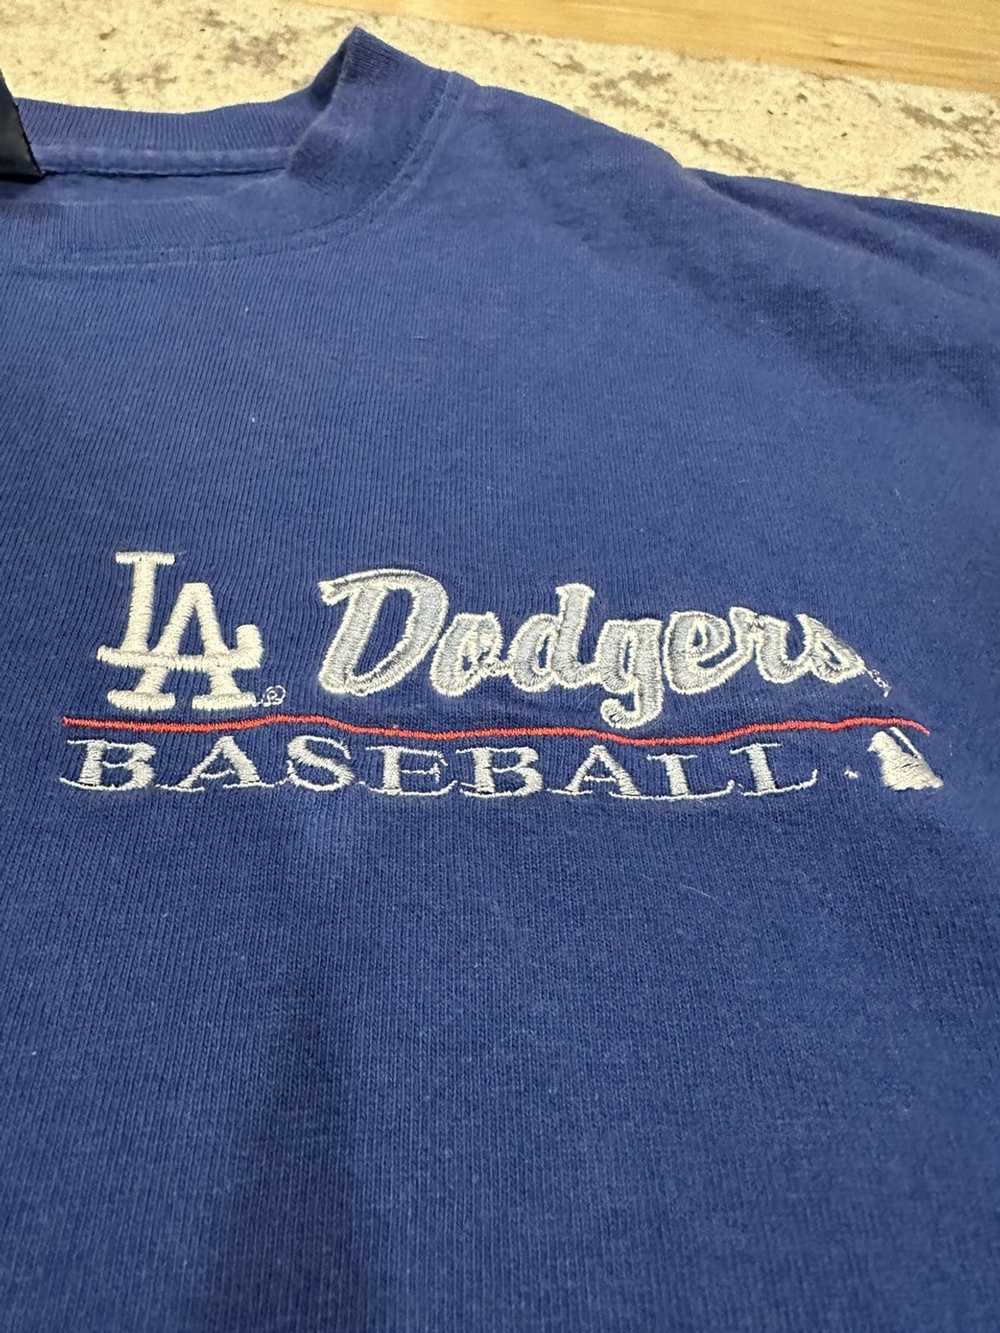 Mitchell & Ness Sweatshirt - All Over Crew 2.0 - La Dodgers - Grey and Dodger Blue - FCPO3400 M